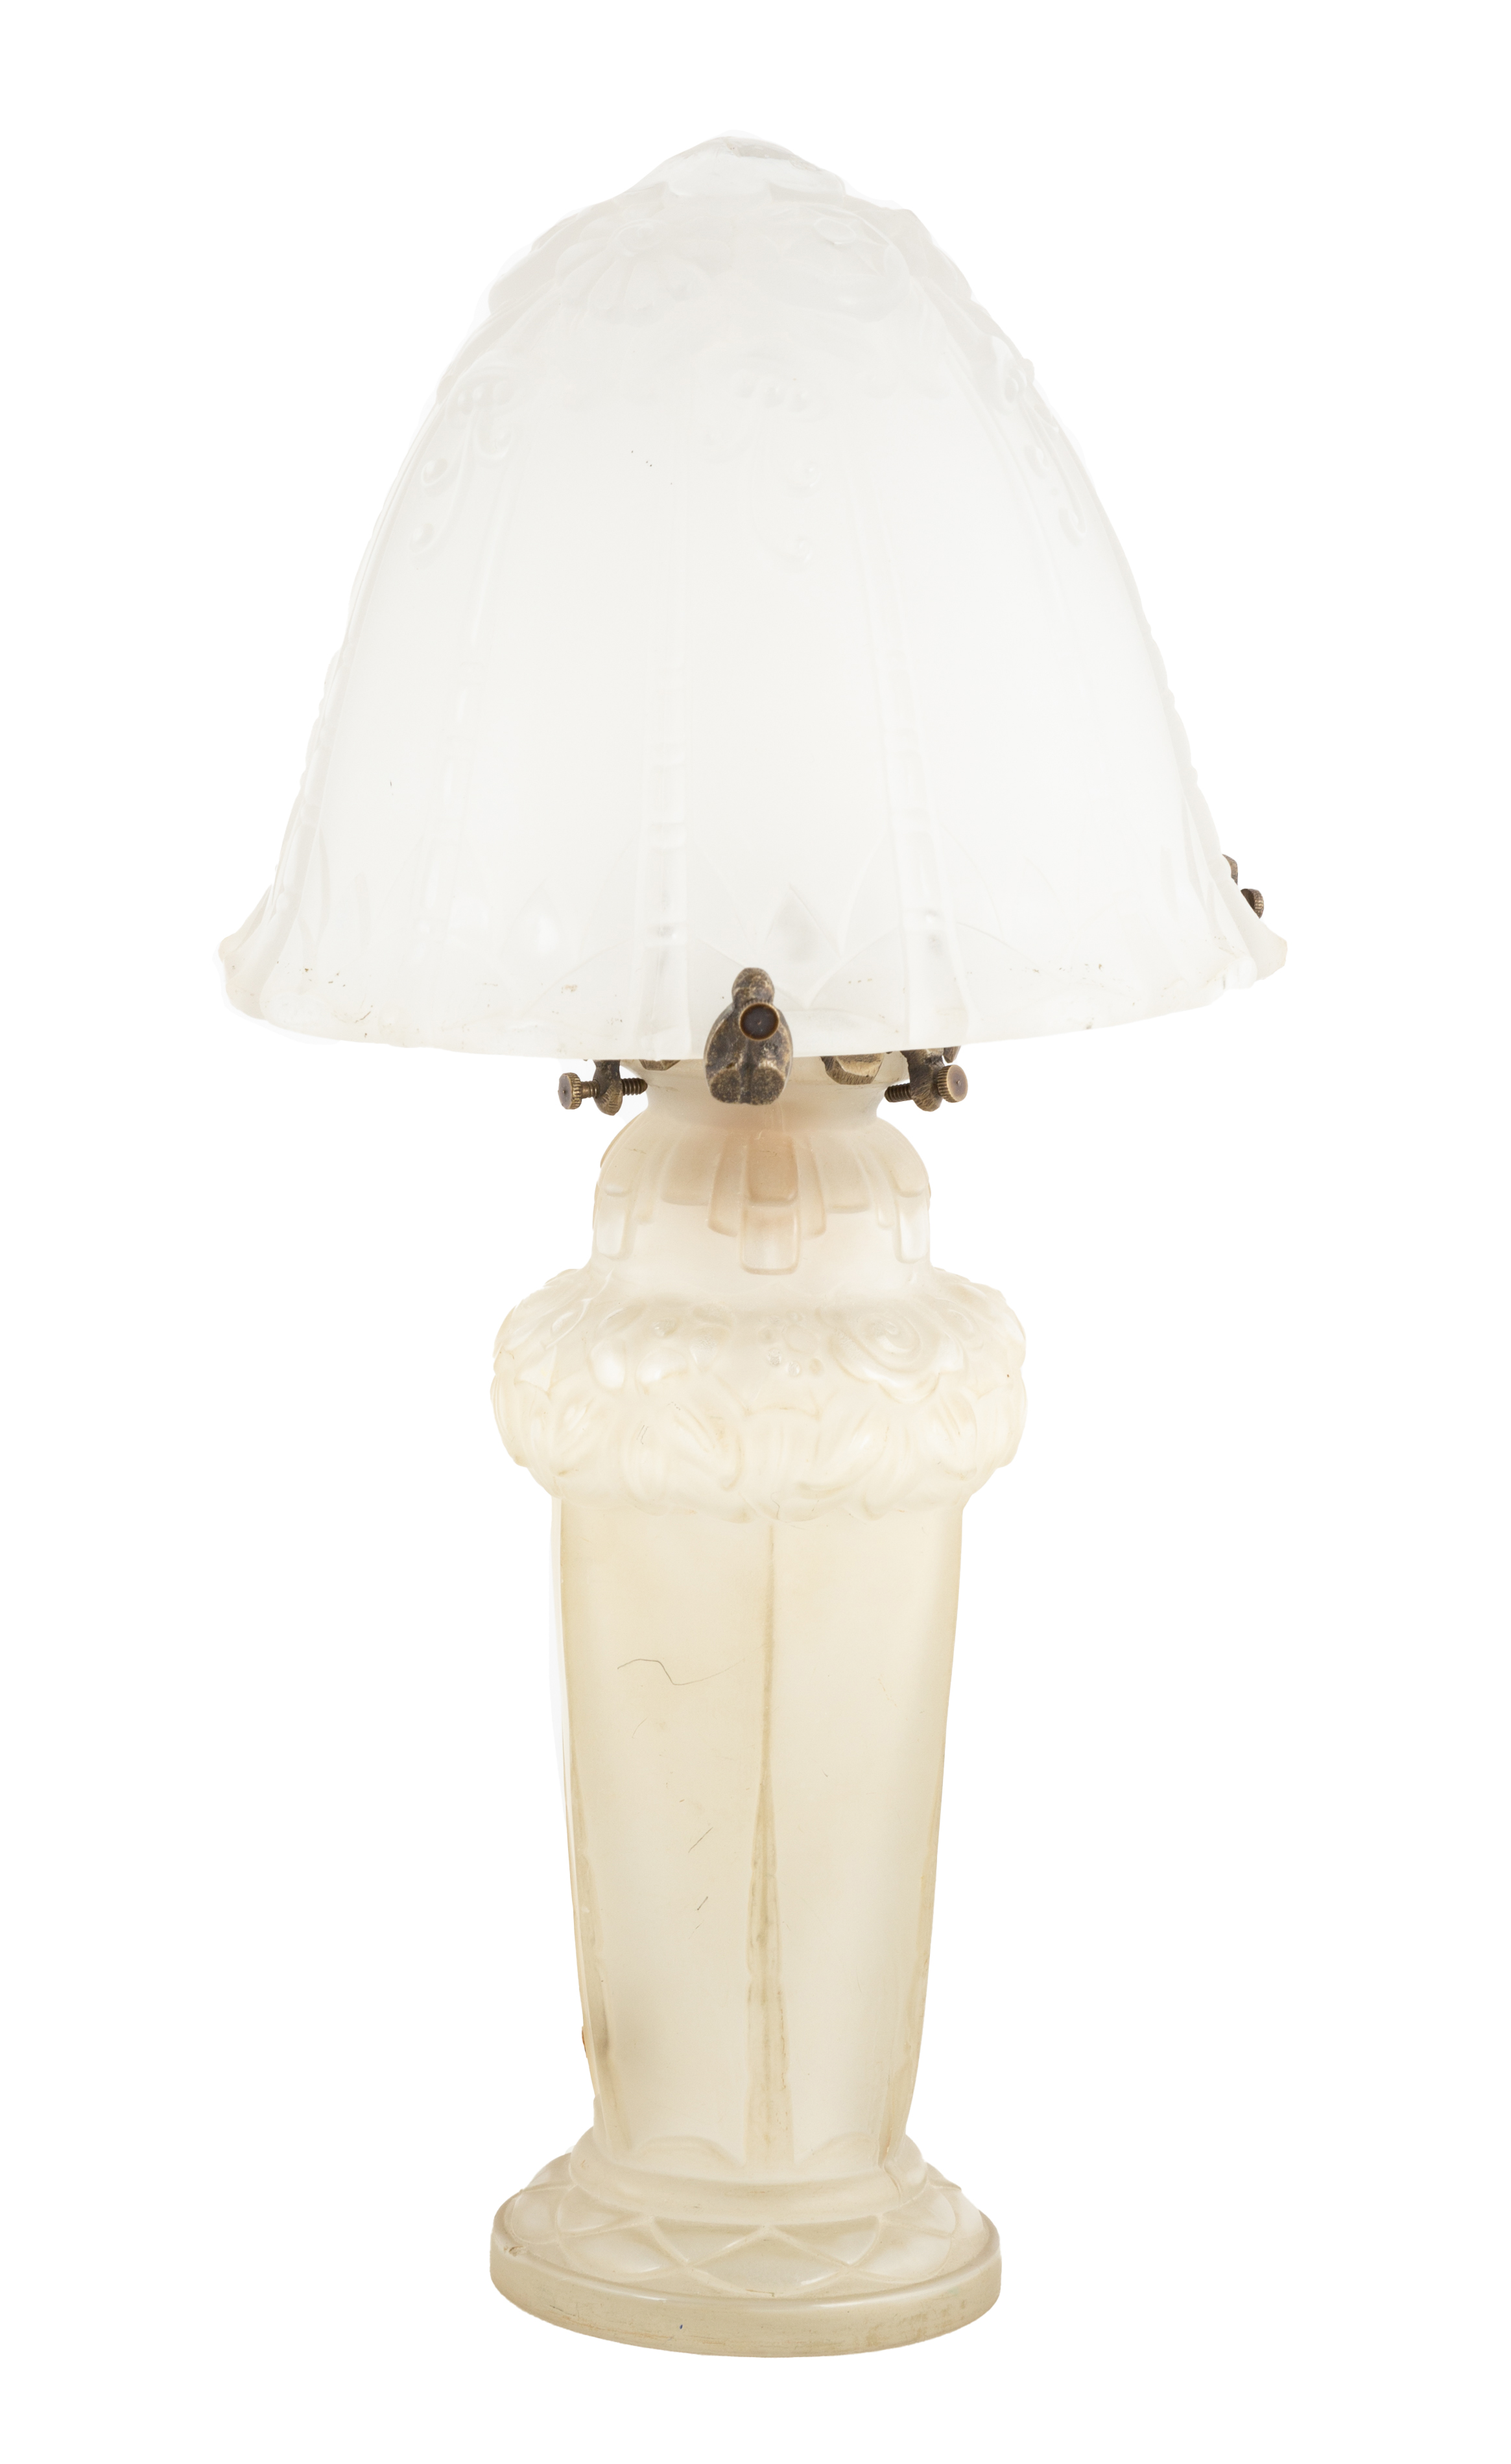 FRENCH ART DECO FROSTED GLASS LAMP 2c86f1